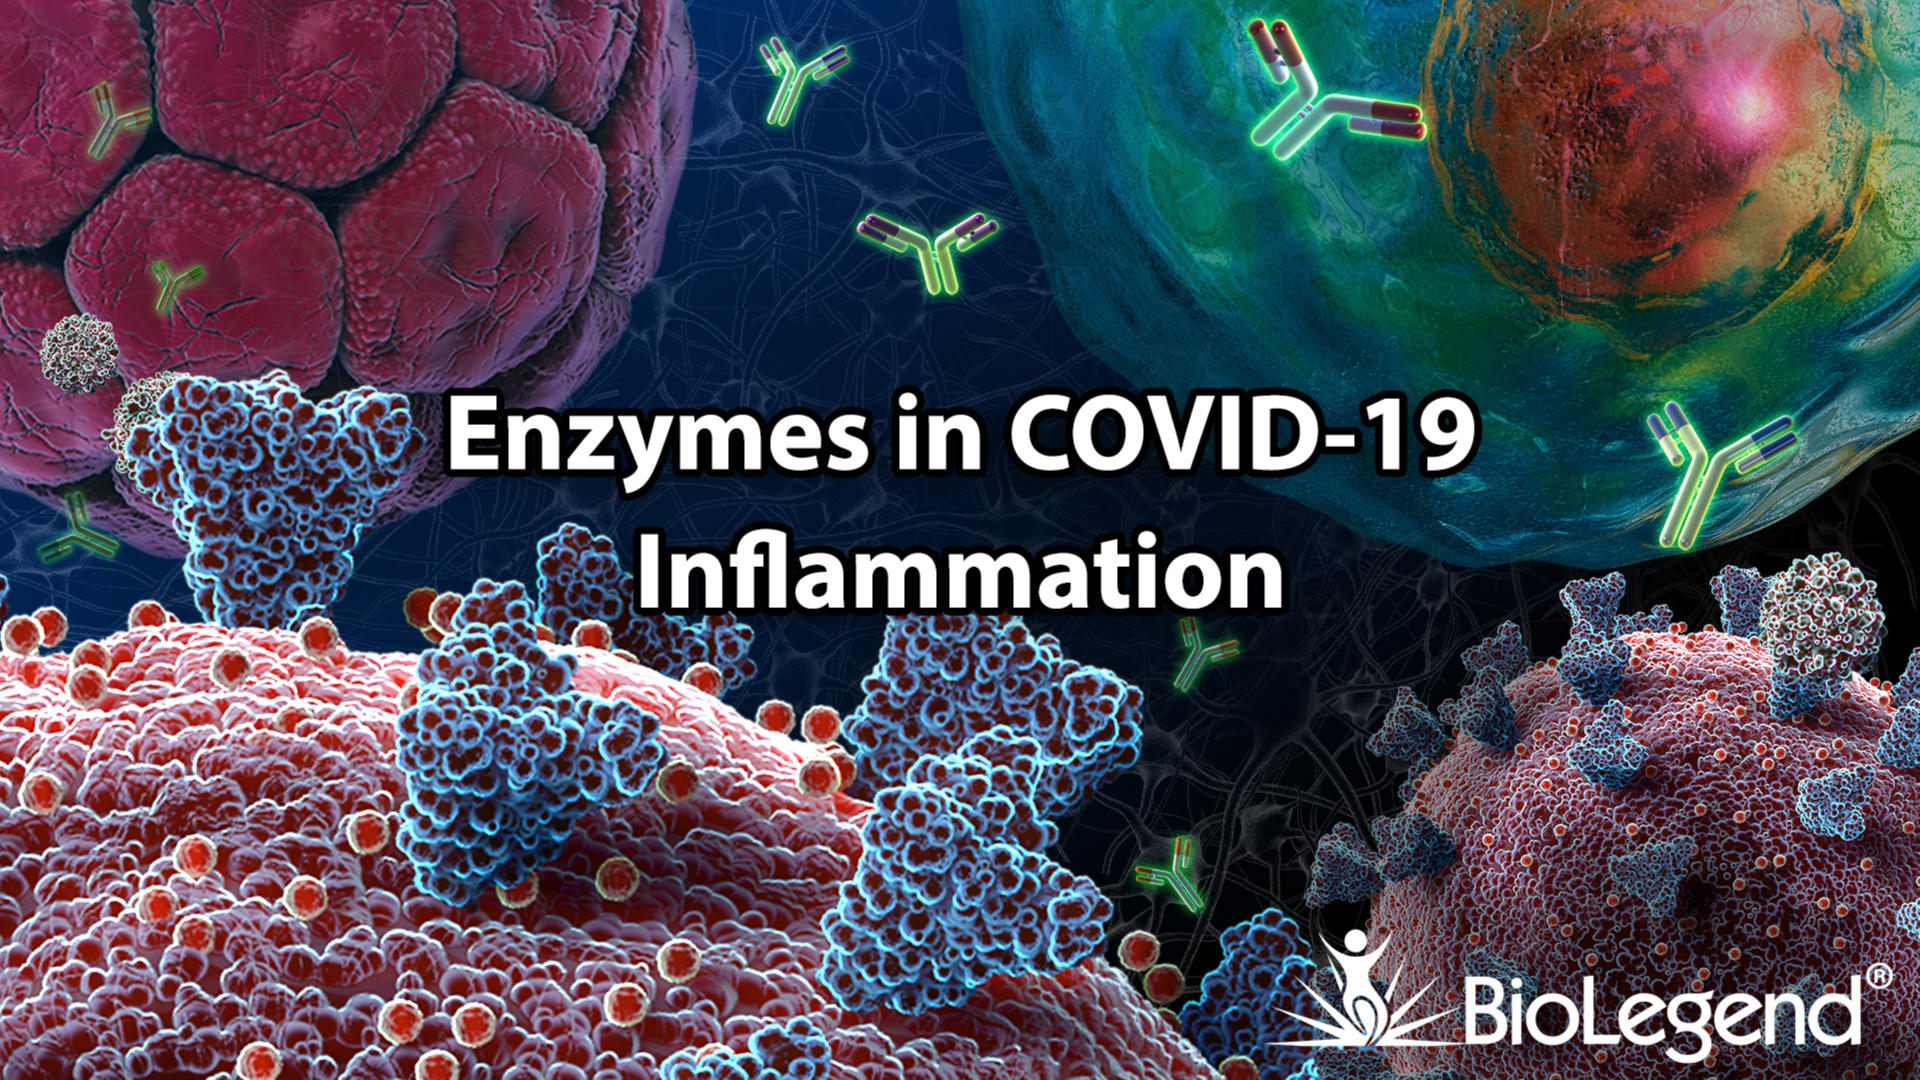 Enzymes in COVID-19 Inflammation